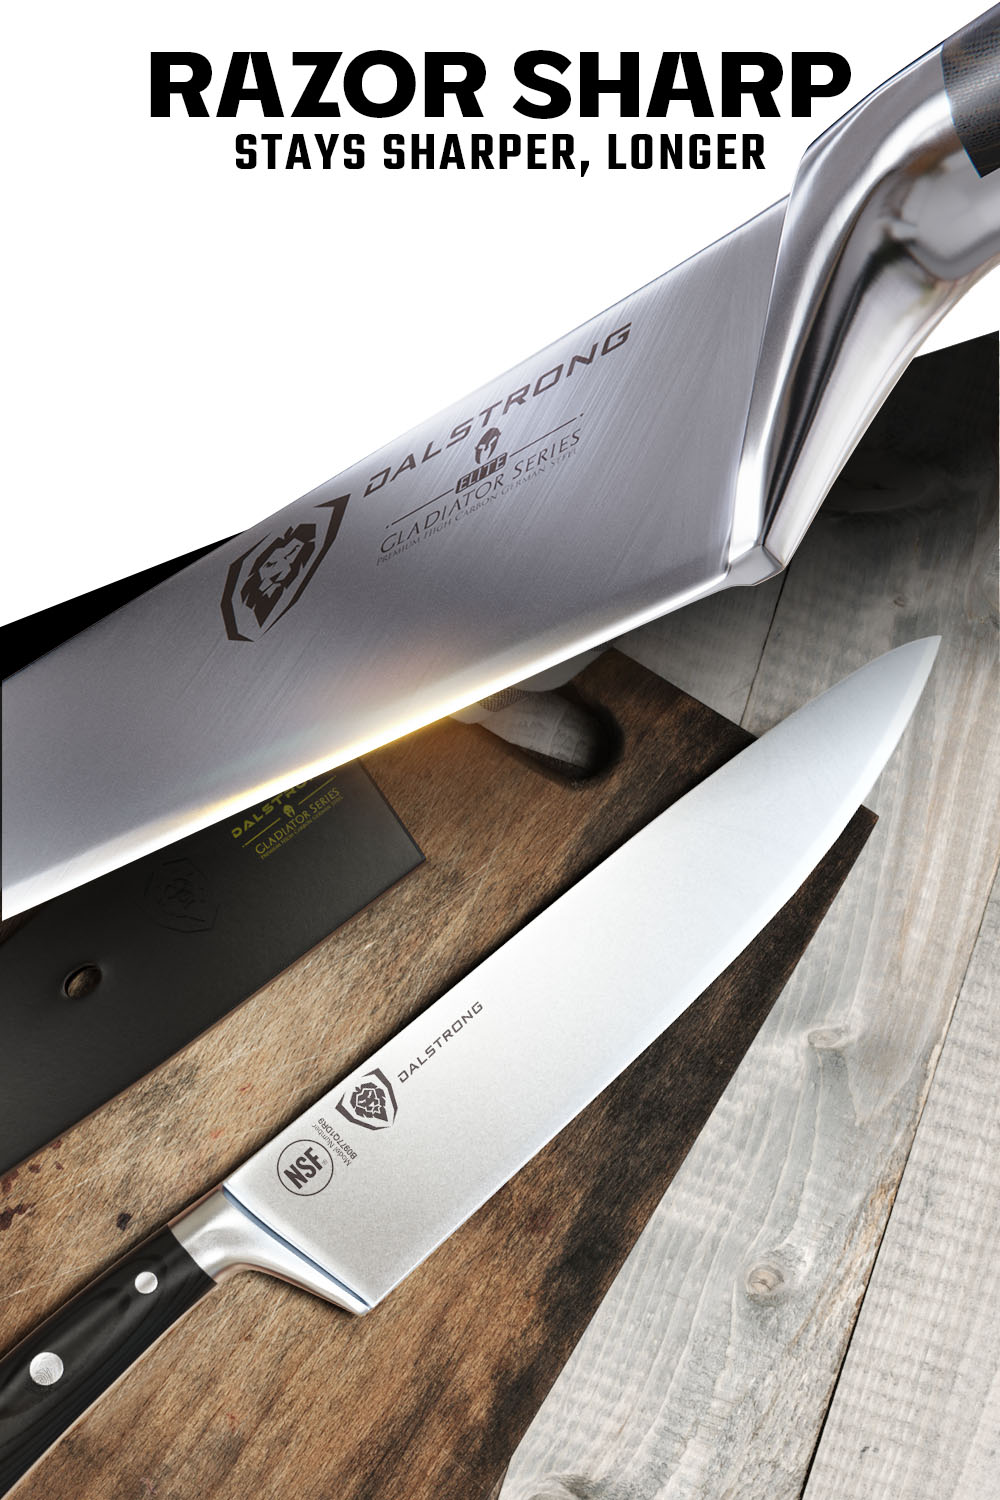 Dalstrong gladiator series 10 inch chef knife with black handle featuring it's razor sharp blade.